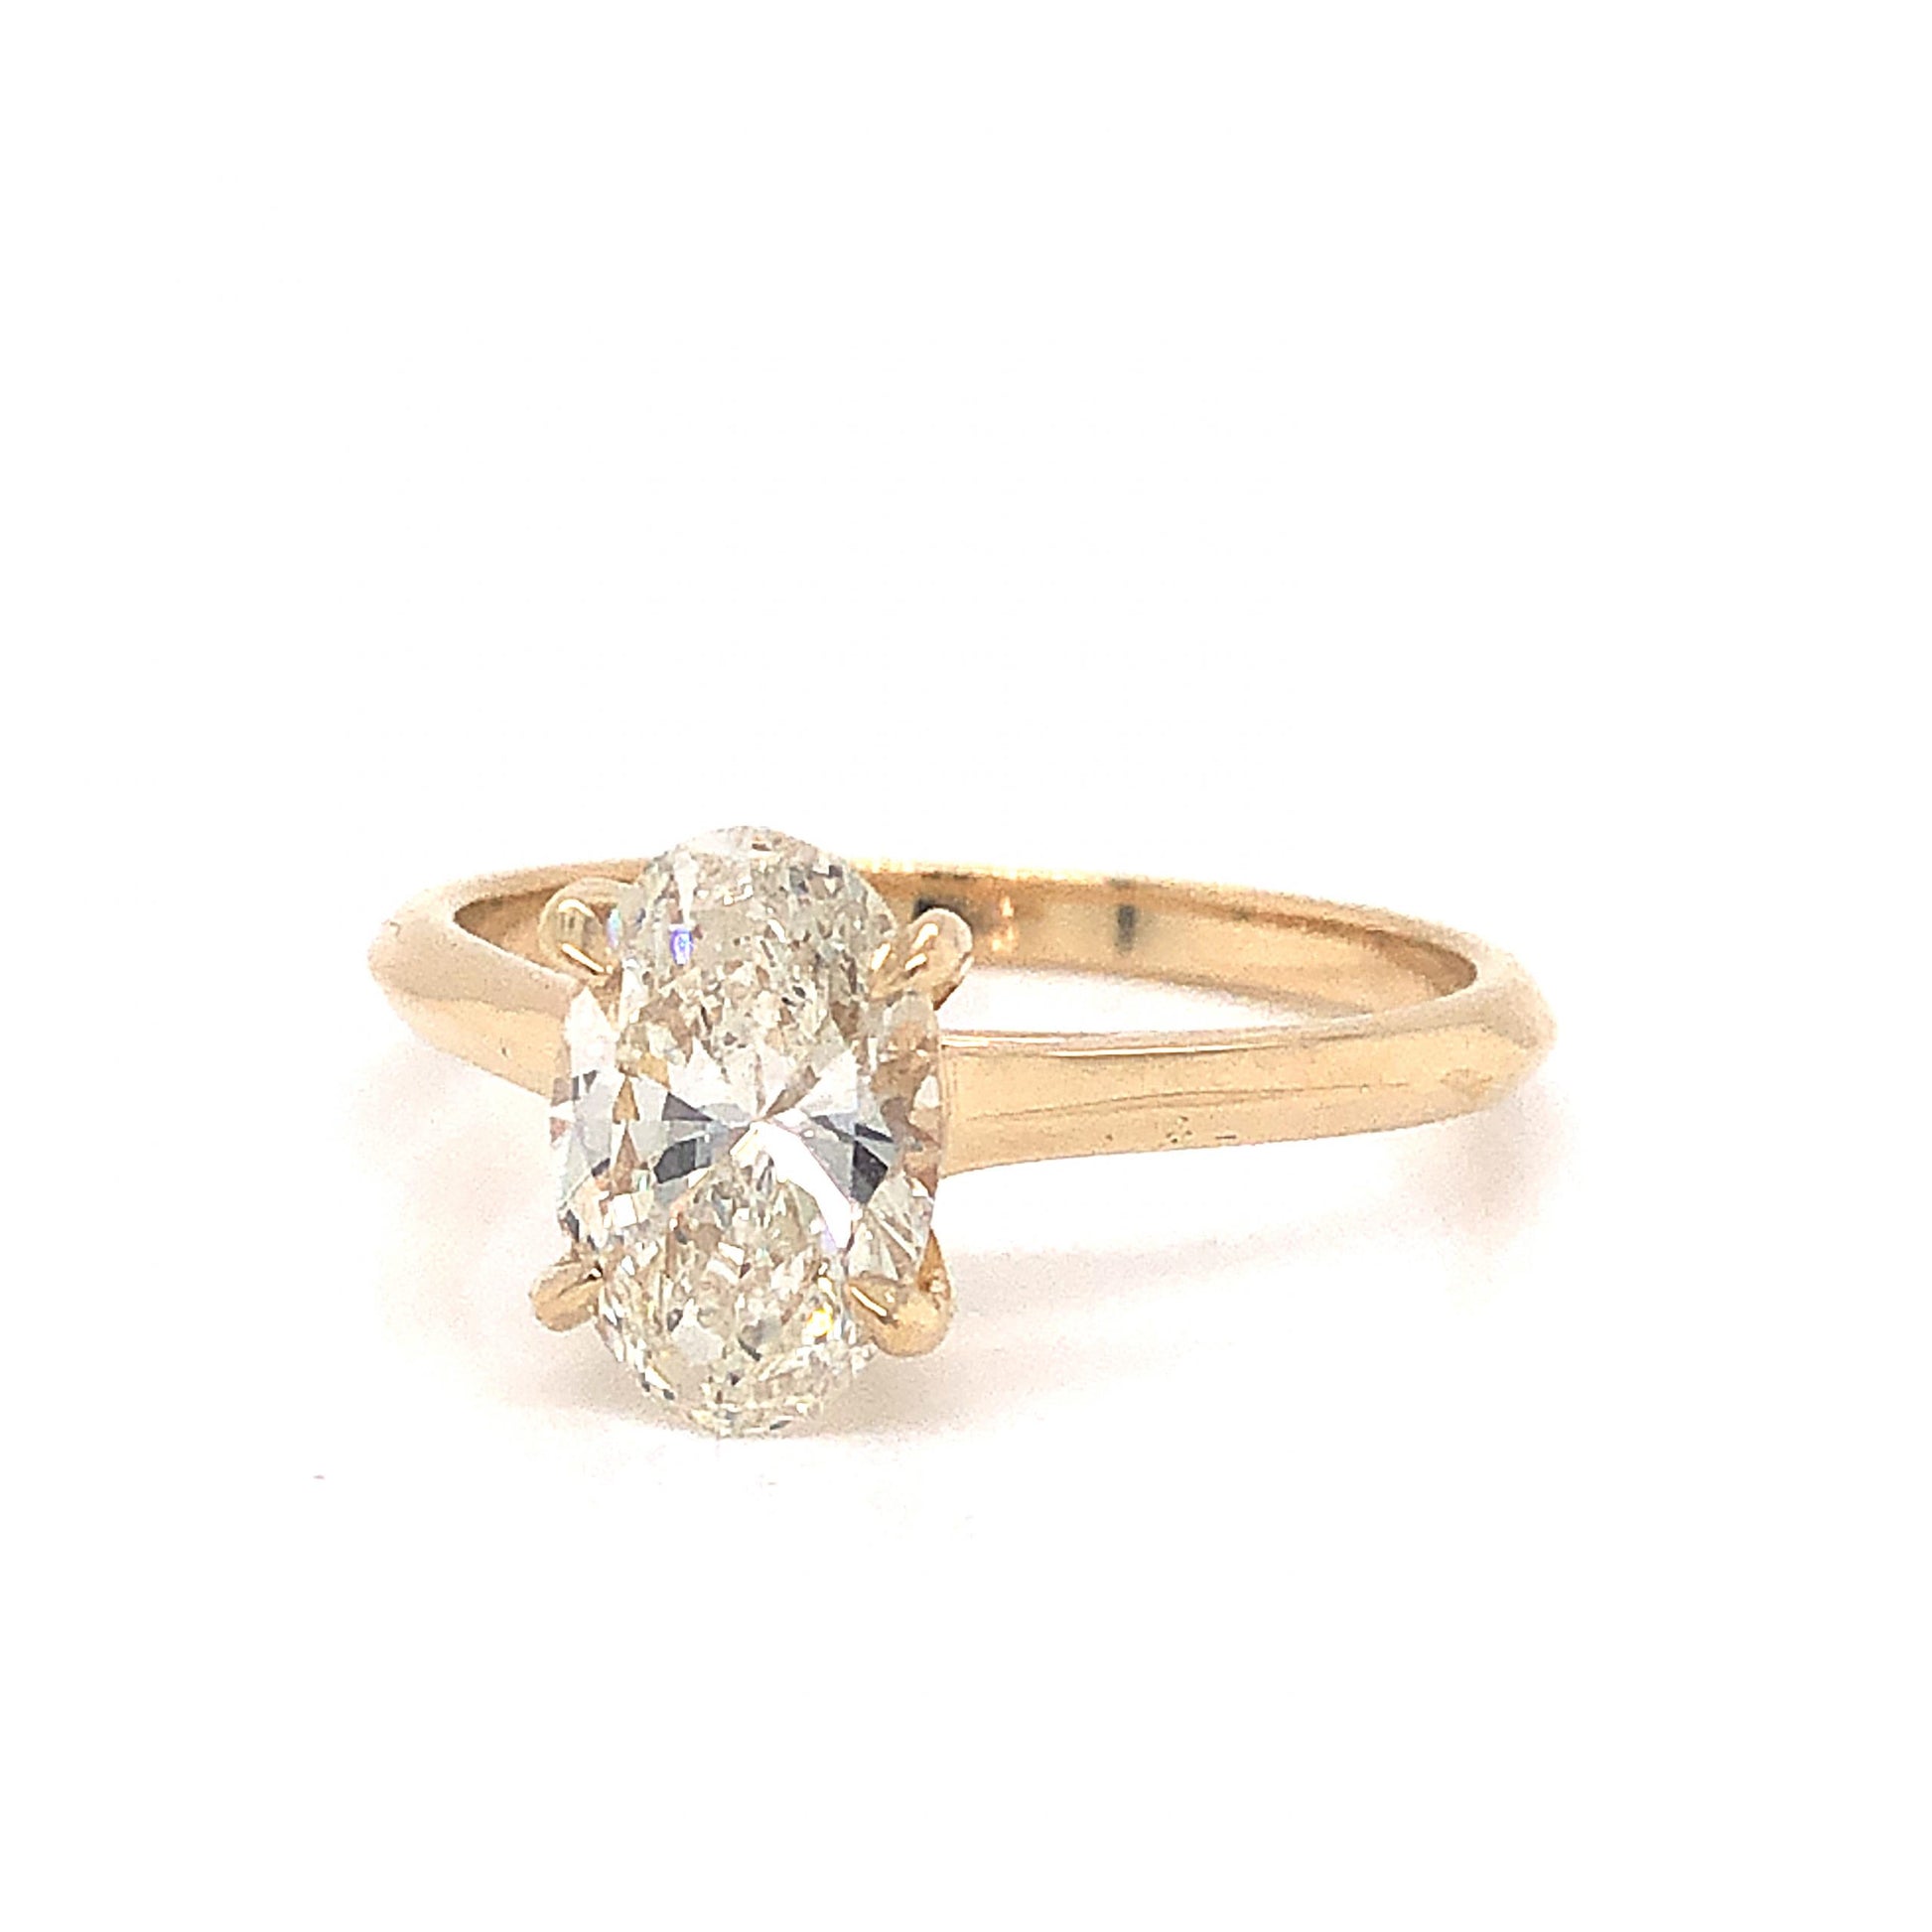 1.51 Oval Cut Solitaire Diamond Engagement Ring in 14k Yellow Gold